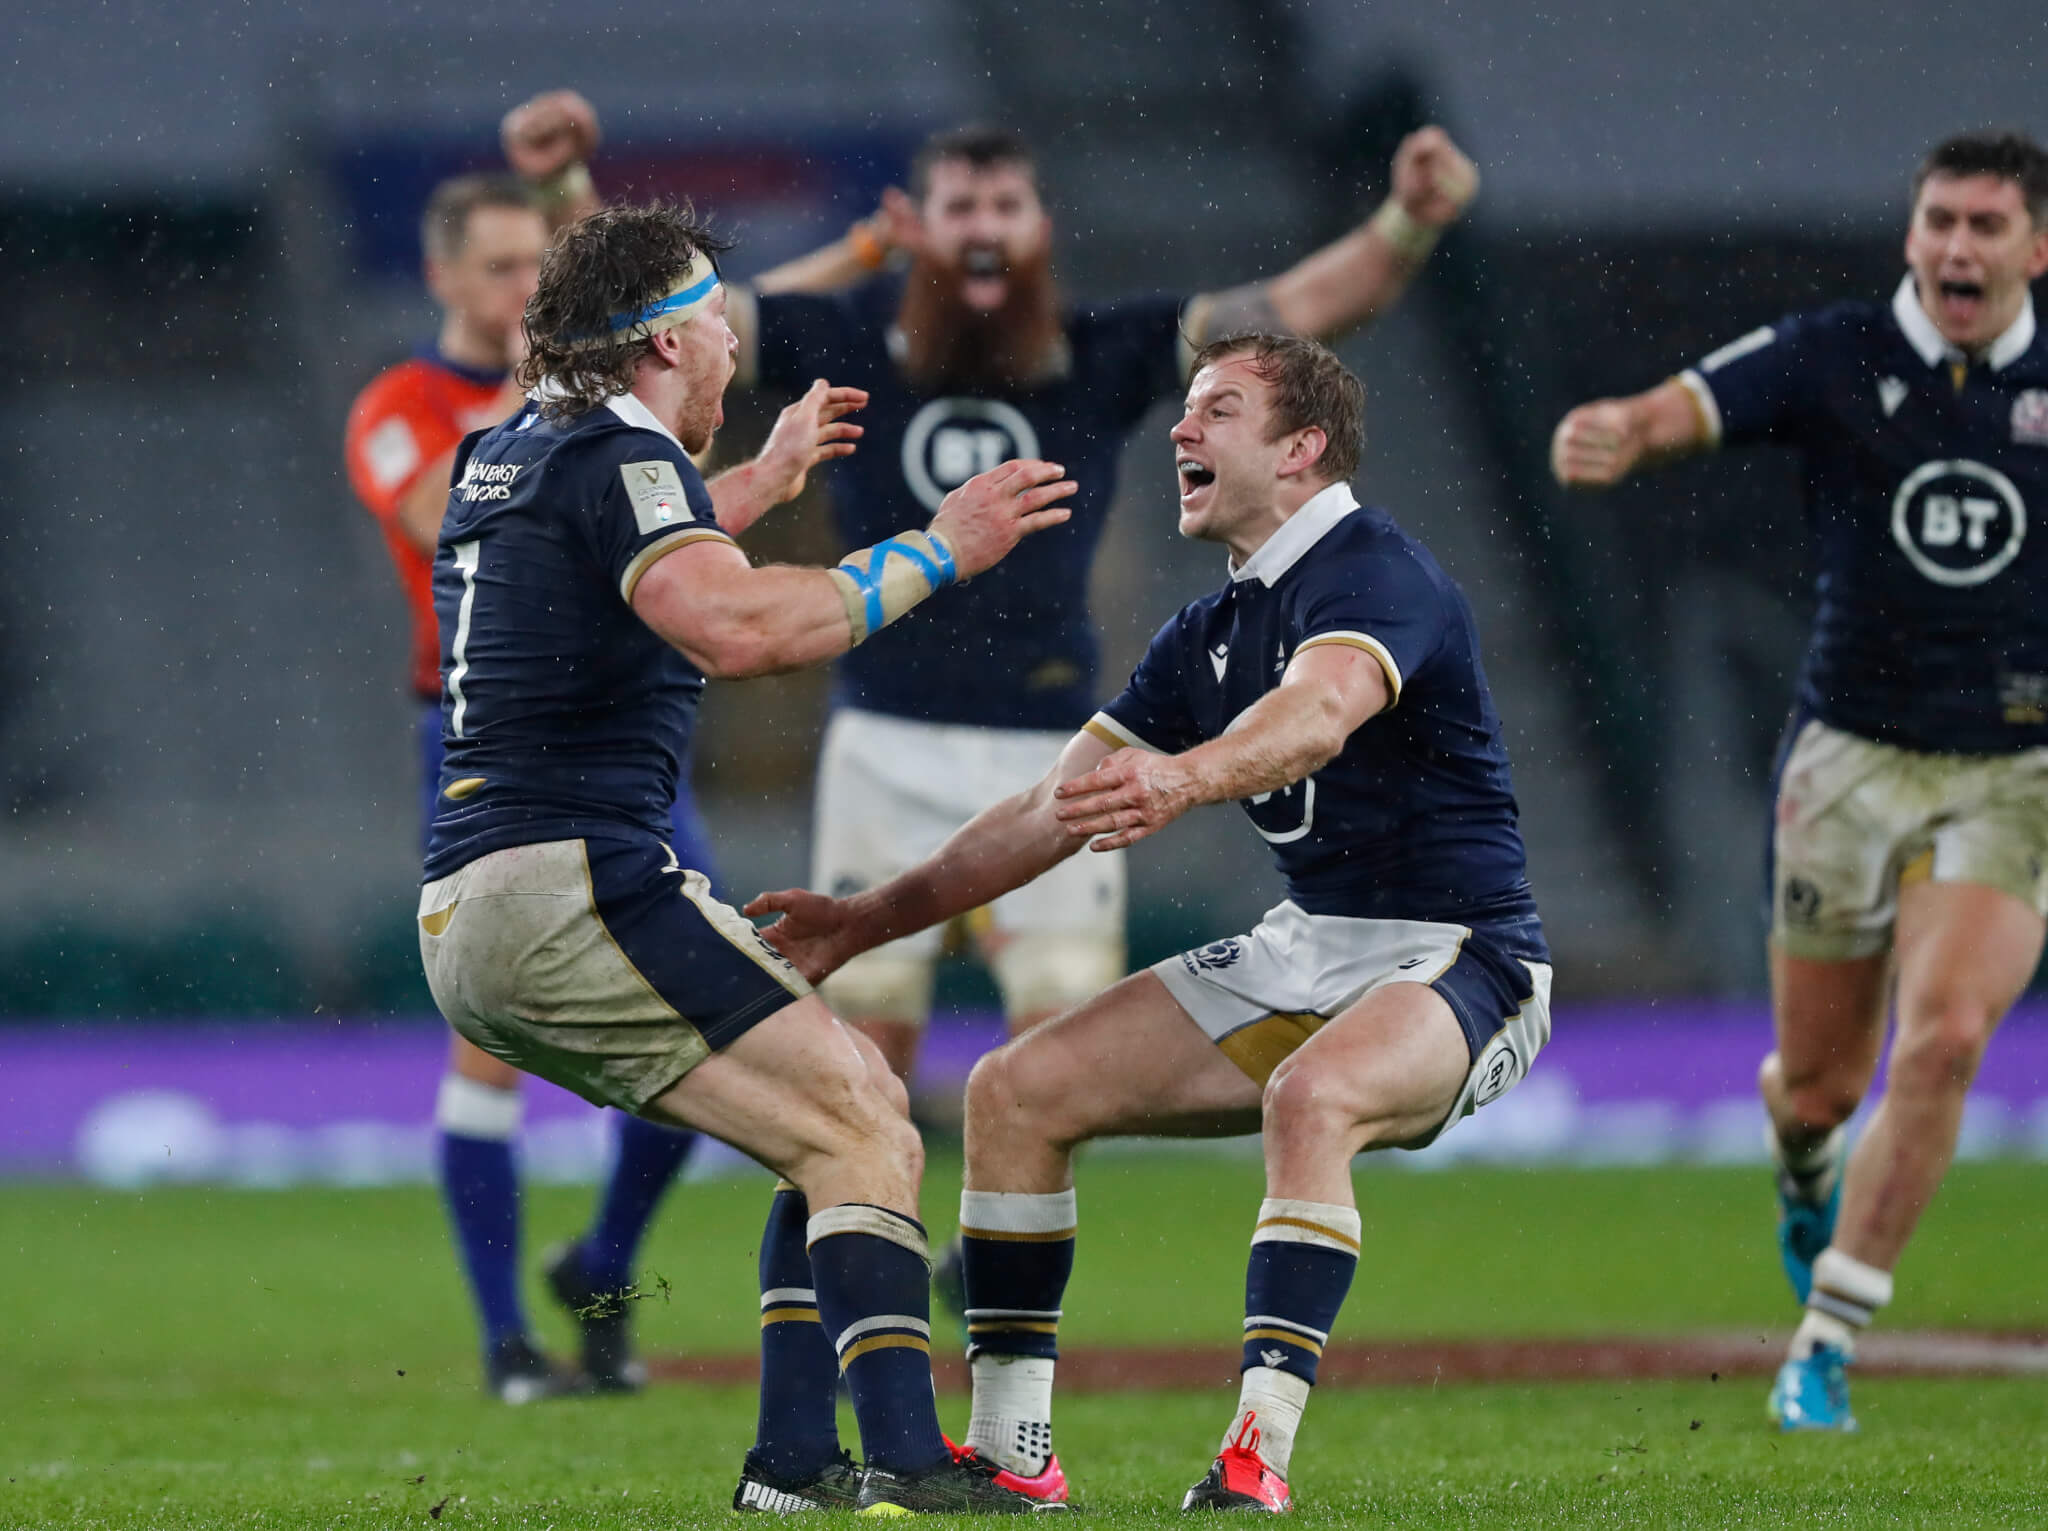 Scotland S 2021 Six Nations Odds Move To 408 After Beating England Away